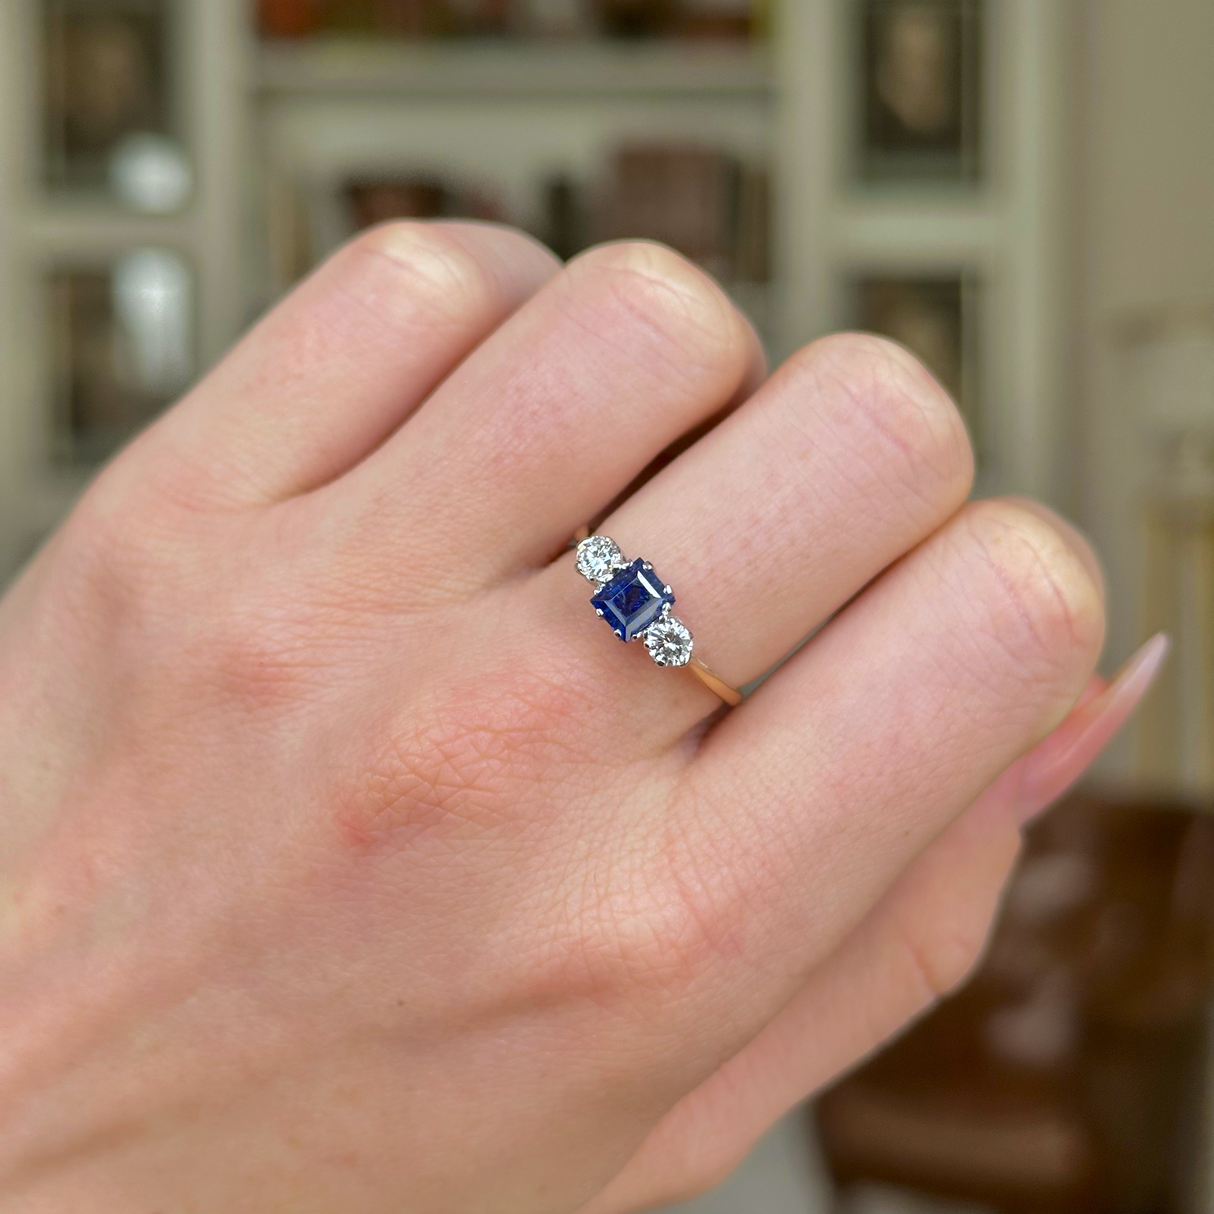 Antique, Edwardian Sapphire and Diamond Three-Stone Engagement Ring, 18ct Yellow Gold and Platinum worn on closed hand.